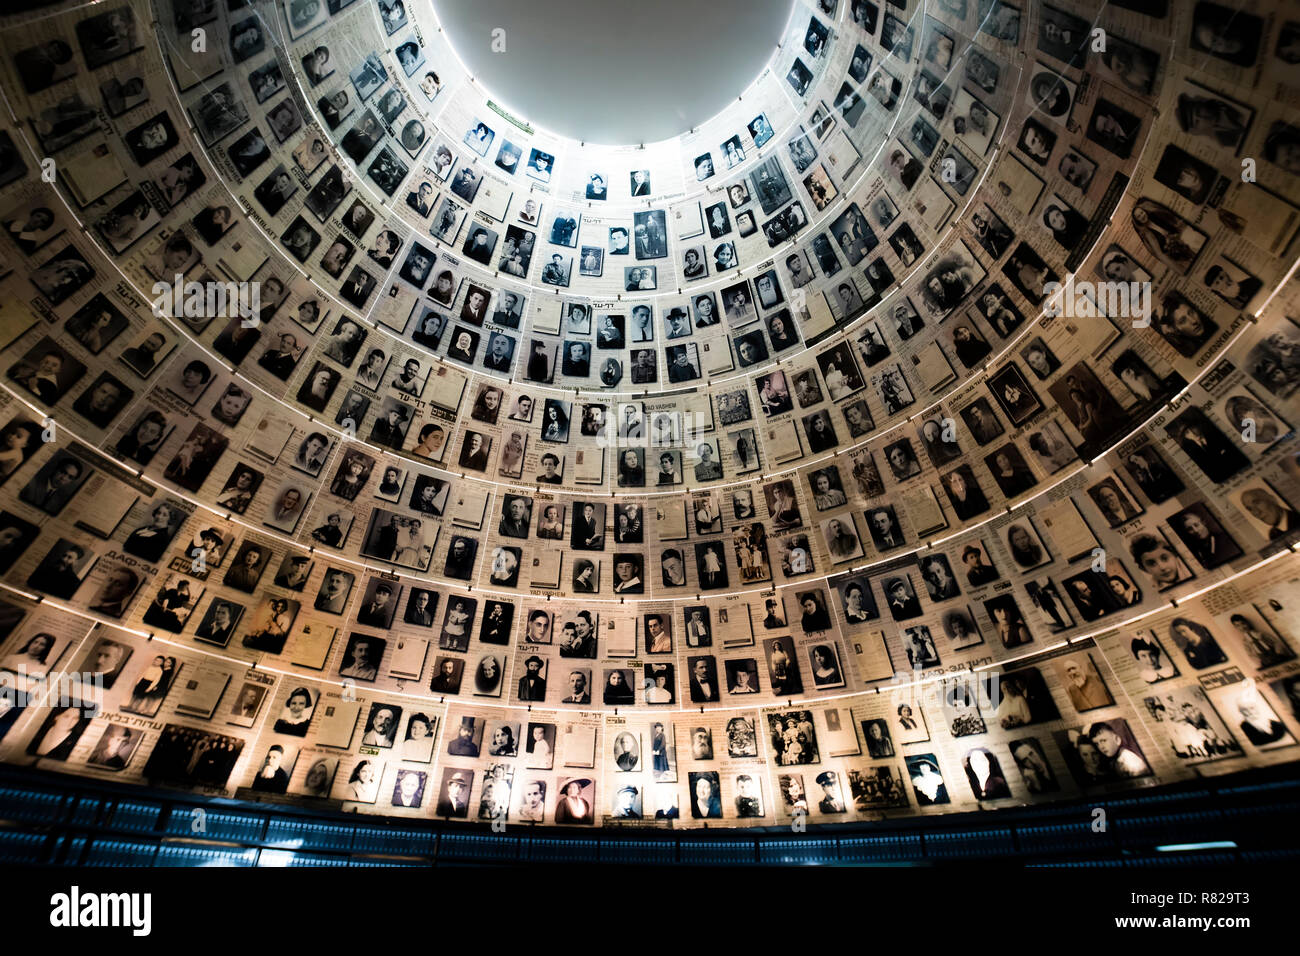 Jerusalem, Israel - February 27th, 2017: The Hall of Names in the Yad Vashem Holocaust Memorial Site in Jerusalem, Israel, remembering some of the 6 million Jews murdered during World War II Stock Photo